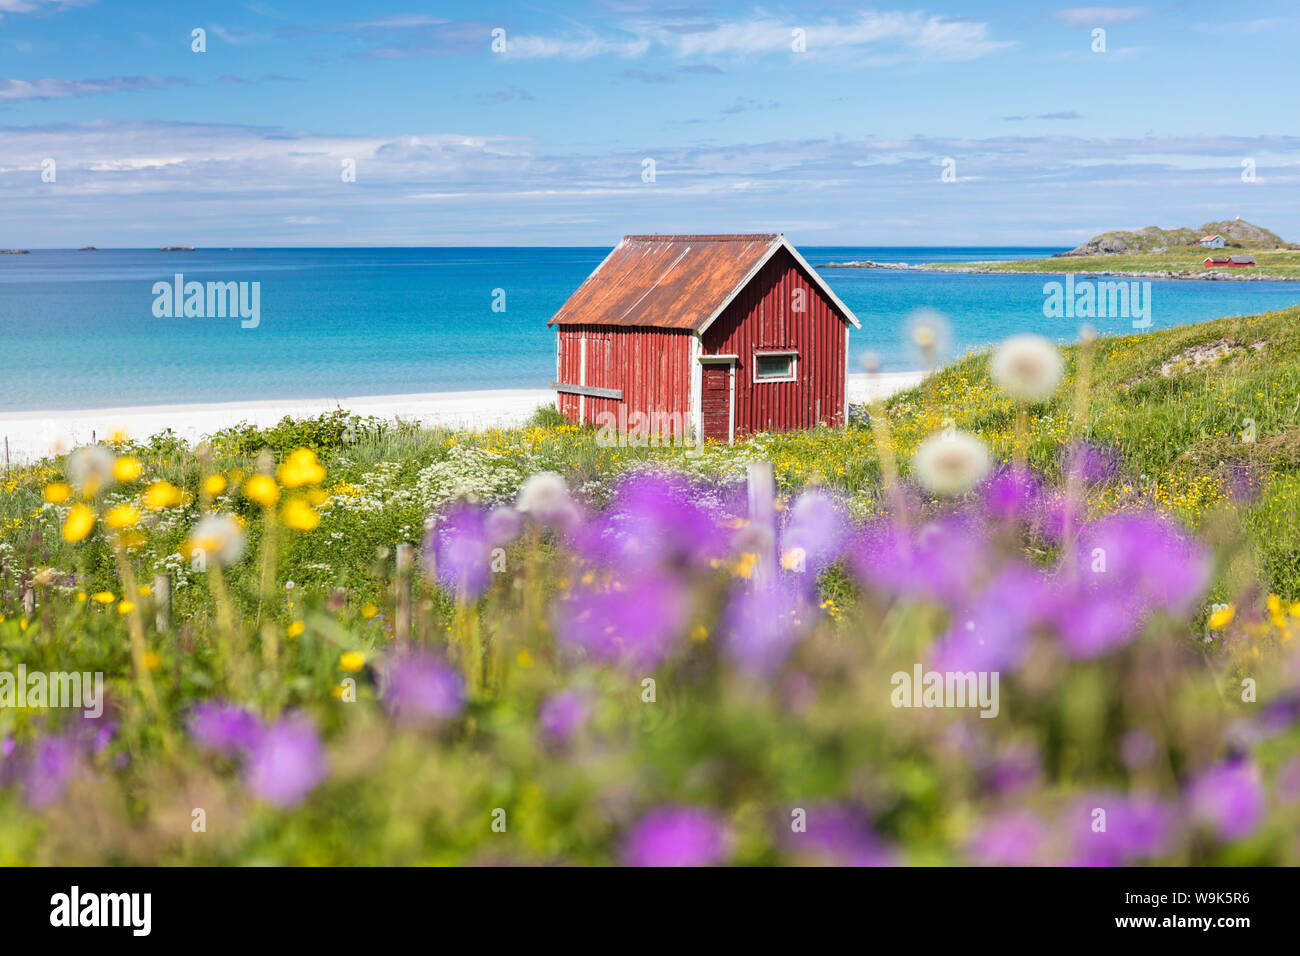 Colorful flowers on green meadows frame the typical rorbu surrounded by turquoise sea, Ramberg, Lofoten Islands, Norway, Scandinavia, Europe Stock Photo